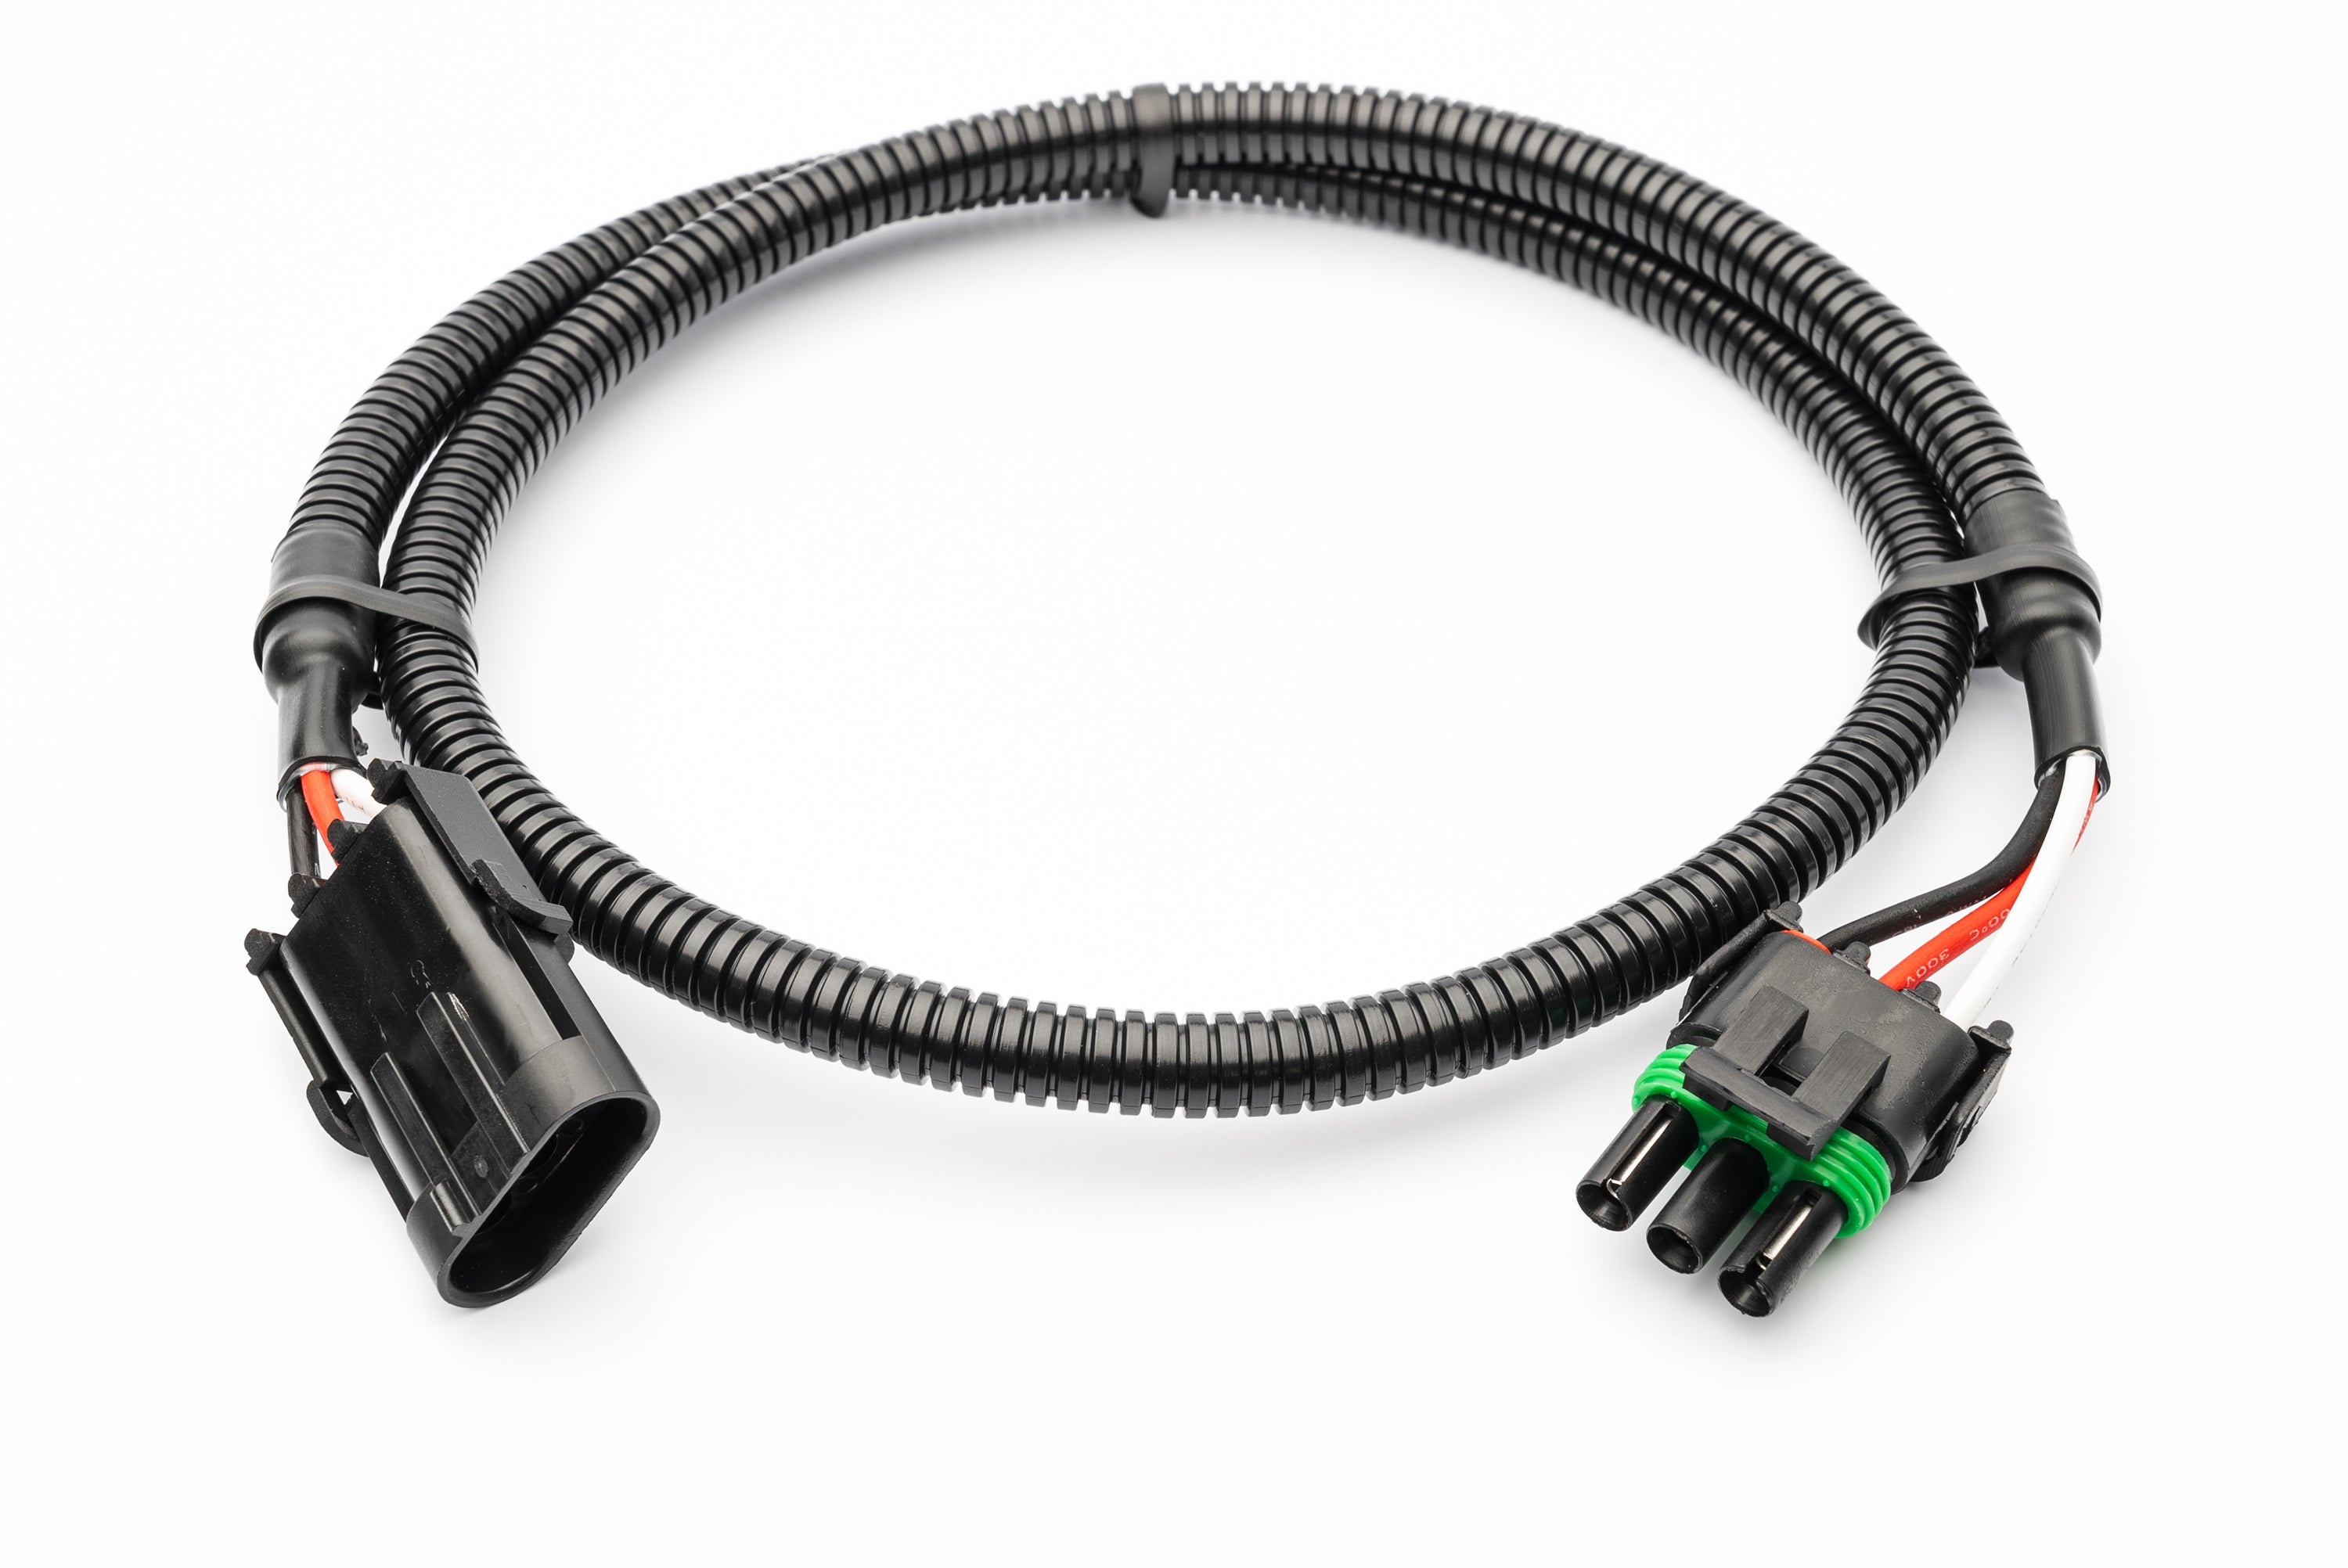 SPV Parts Harness 3 Foot Extension with 3 Pole Connectors (To Lights etc) - SPV Harness System